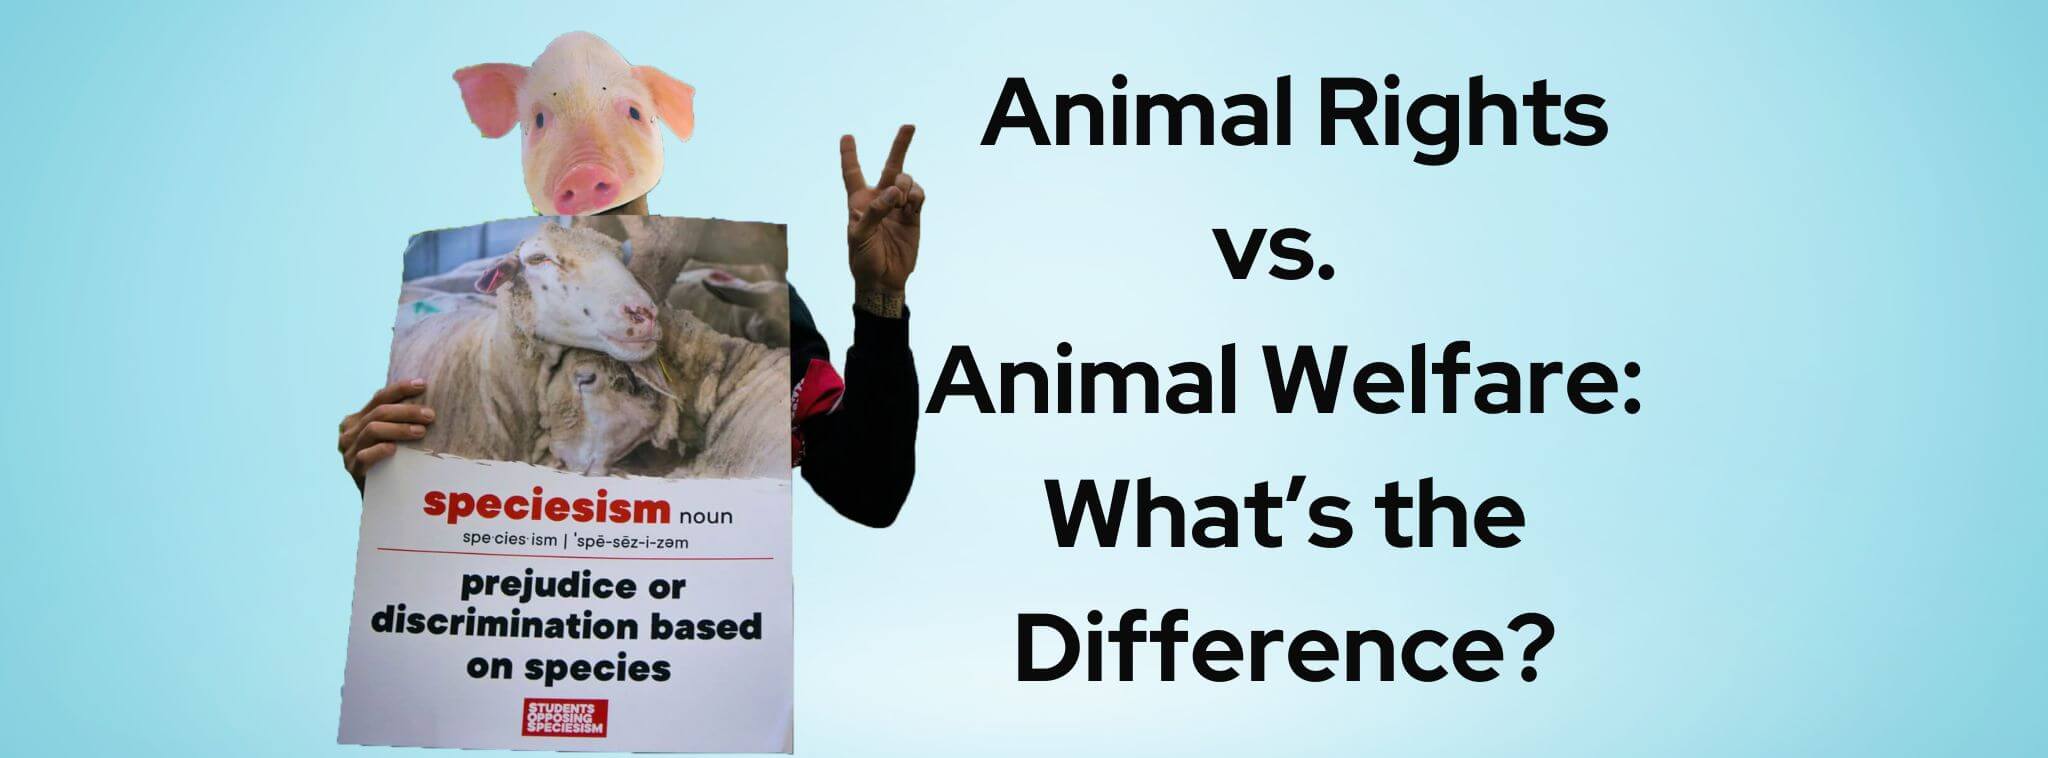 research questions on animal rights